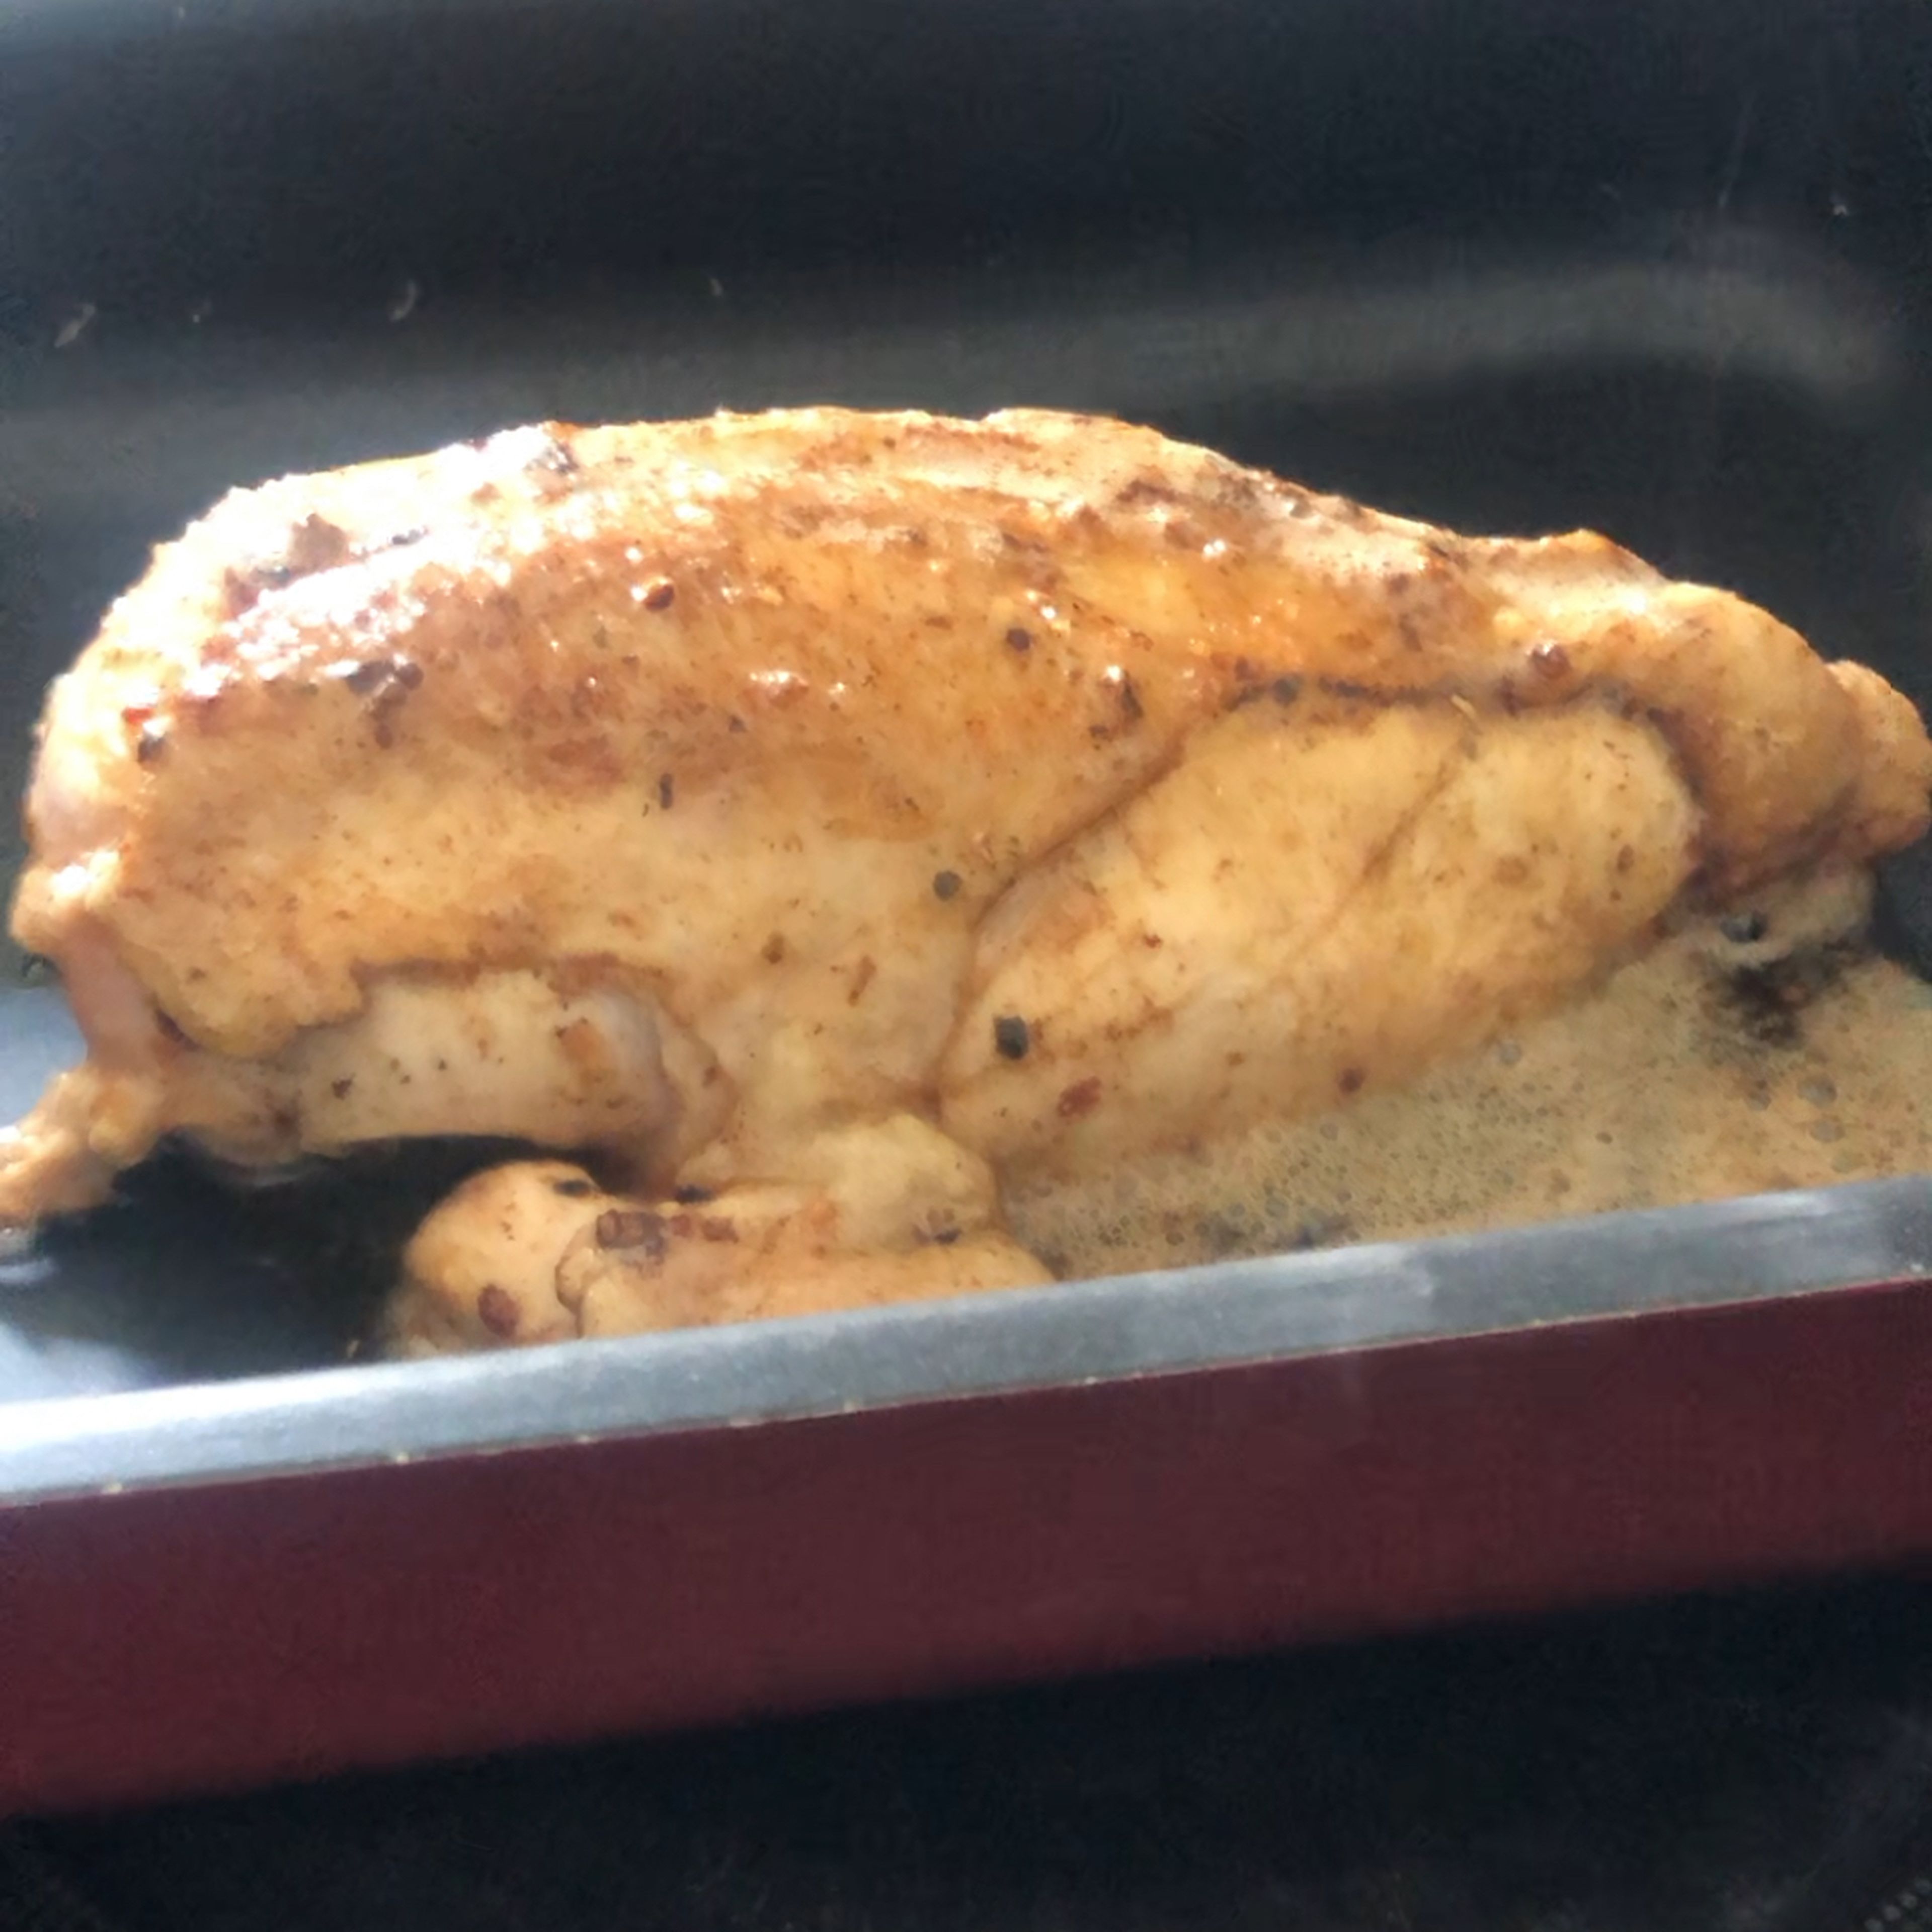 In a hot nonstick pan, add butter then put the seasoned chicken(with salt and pepper) skin down. We stir fry the chicken from all sides and we put it in a baking pan skin up and we drop all the butter on top. Put it in the oven on 350 degrees Fahrenheit for 10 min. Remove it, and with a spoon take the butter and oil in the pan and drip it on top of the chicken. Cover the pan with foil aluminium and return it to the oven to cook for 45 min or until you feel that it’s well cooked.